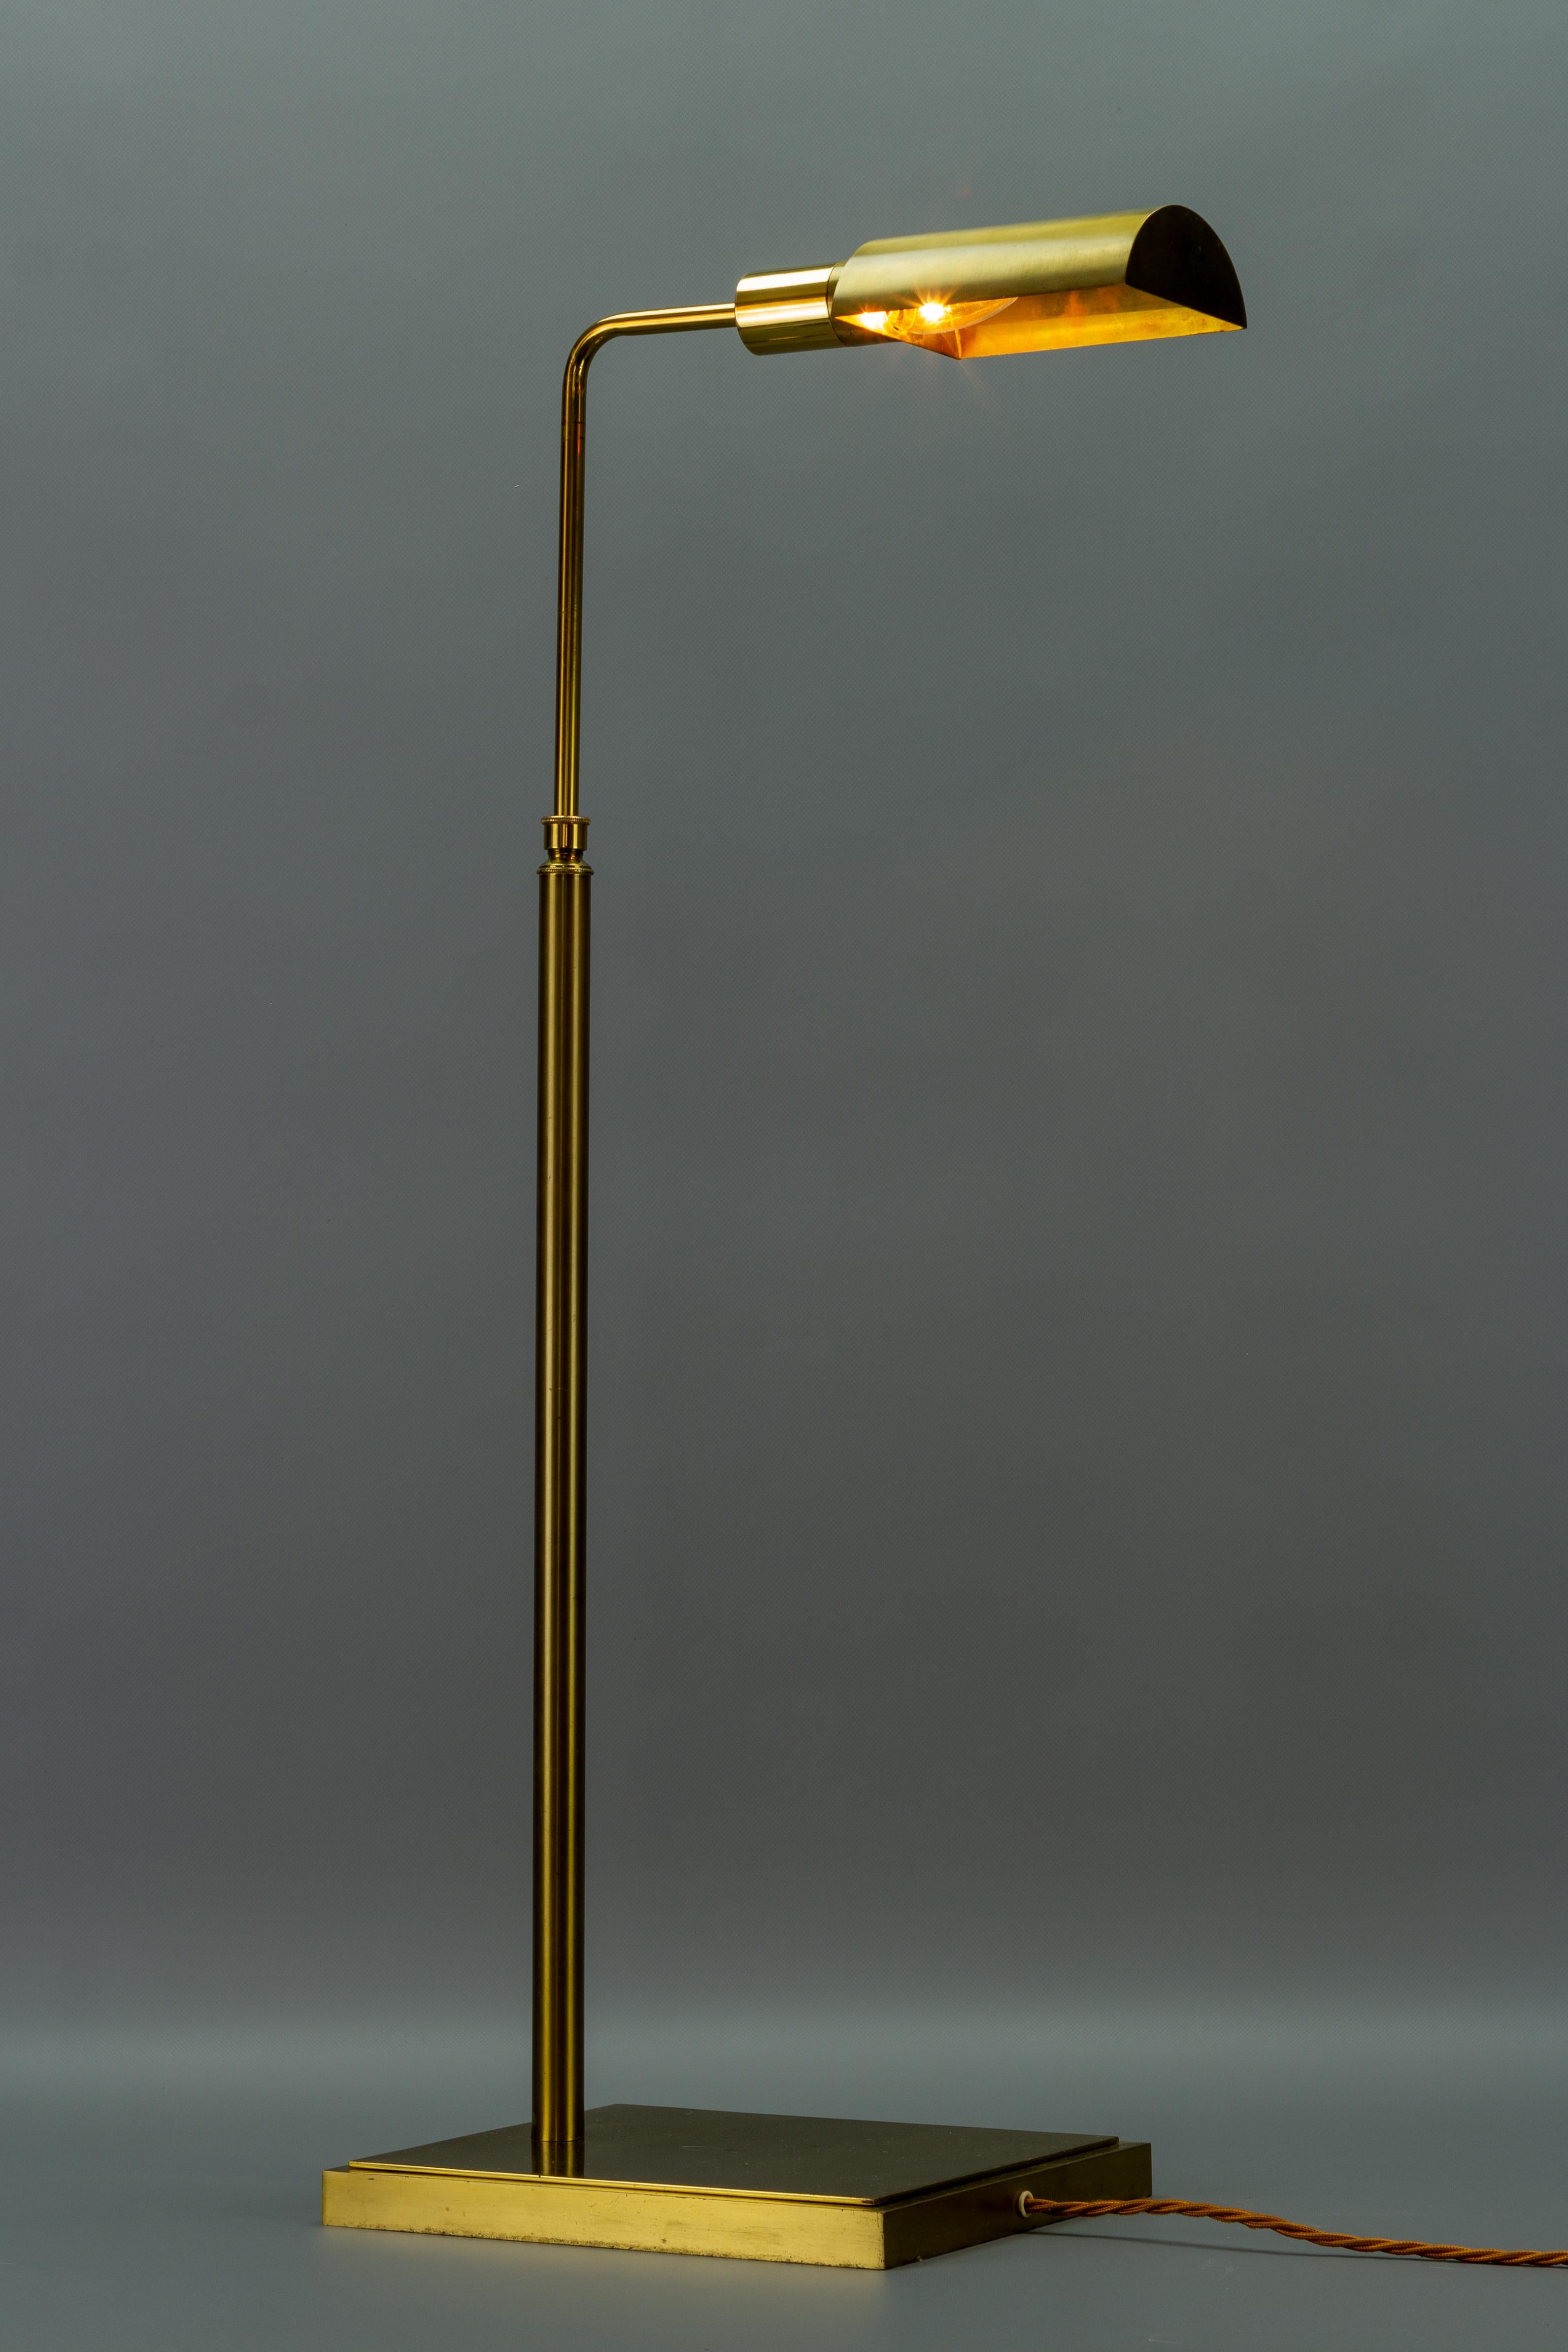 An elegant Mid-Century floor lamp, made of brass, Europe, the 1970s. Adjustable height from circa 71 cm / 27.95 to circa 121 cm / 47.63 in.
One socket for an E14-size light bulb.
The light fixture is in complete working order, but as with all